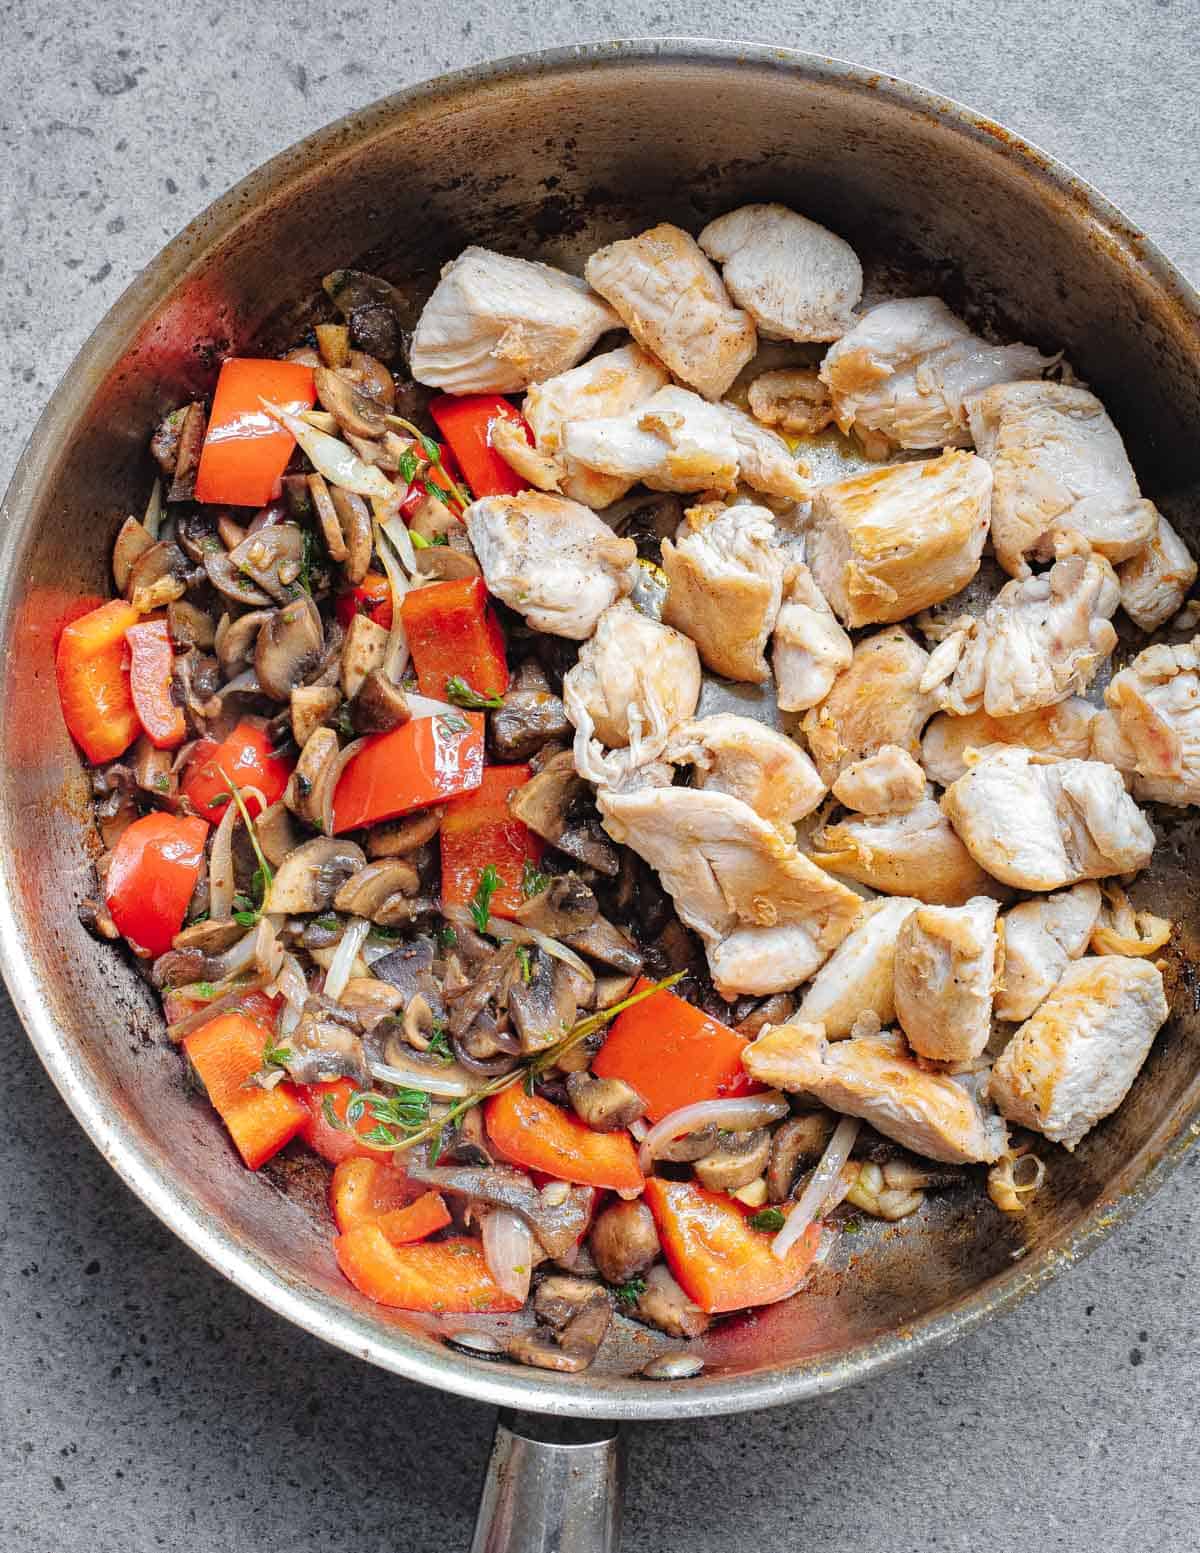 Chicken bites in a pan with mushrooms, onions and peppers on the side.